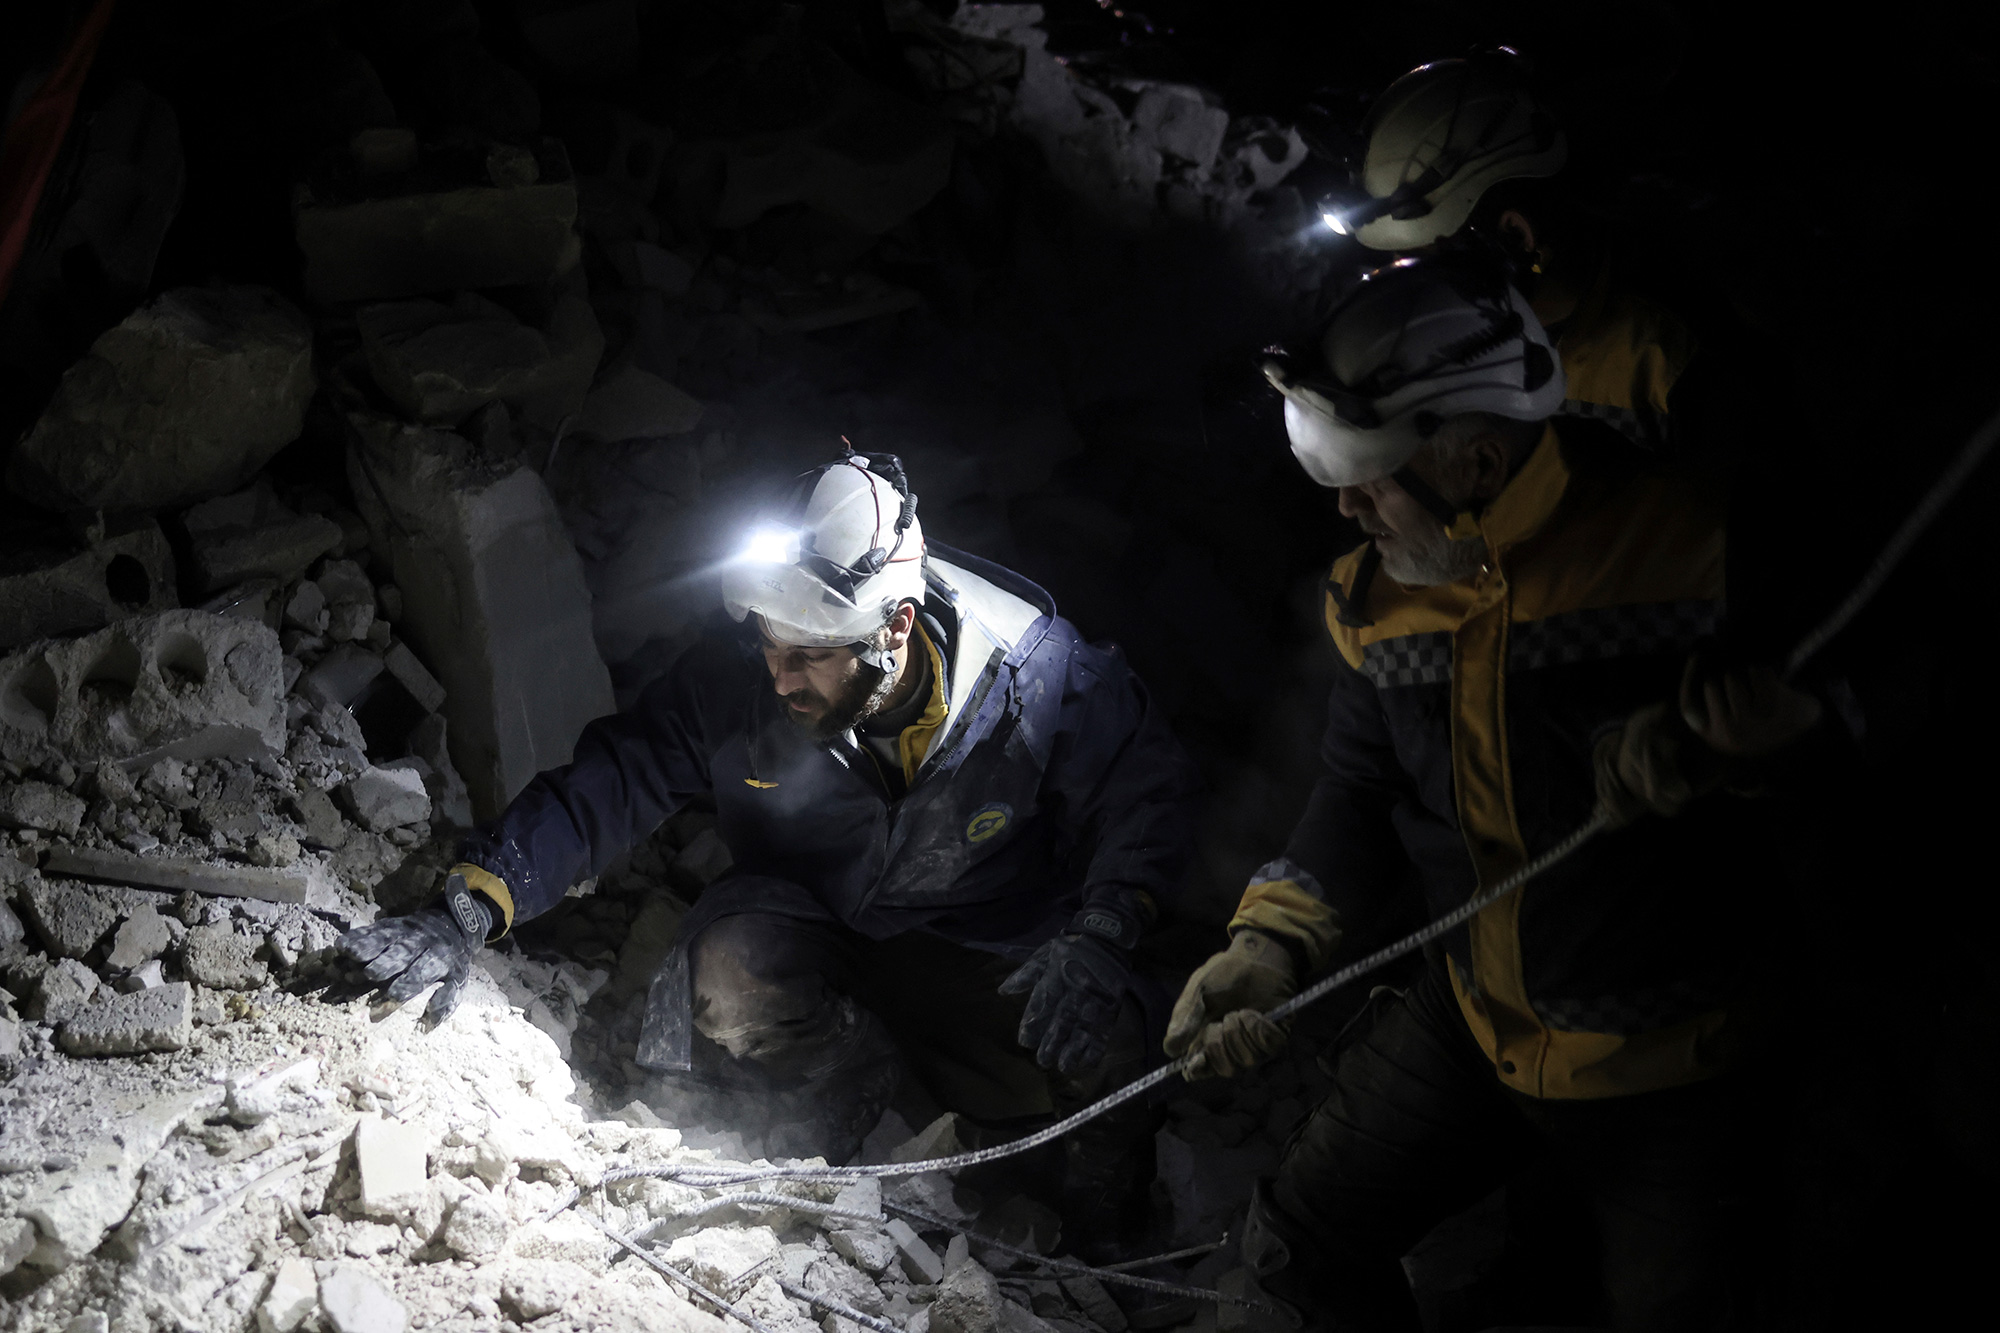 Civilians and White Helmets members work to save people trapped beneath a destroyed building in Harem, Syria, on February 7.